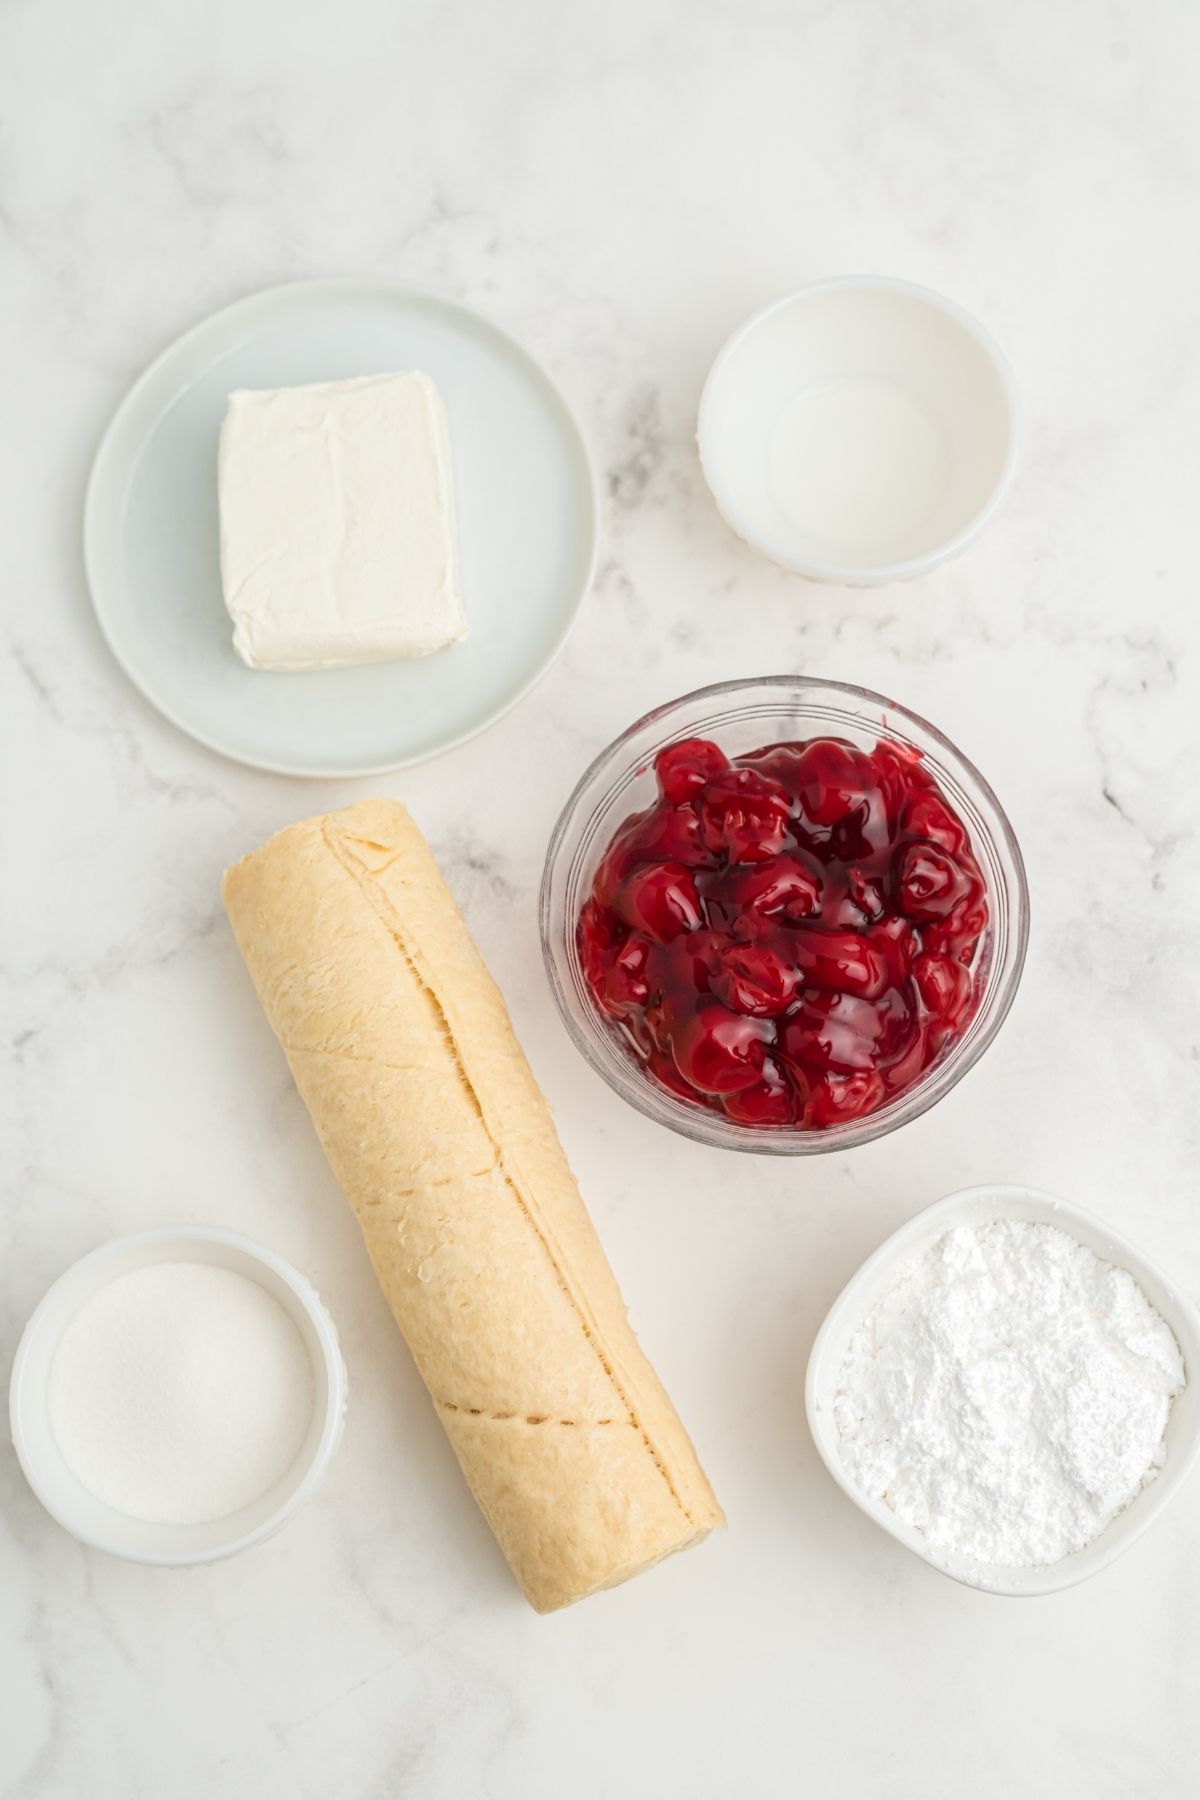 ingredients on white marble counter: block of cream cheese, milk, cherry pie filling, powdered sugar, rolled crescent roll dough, sugar